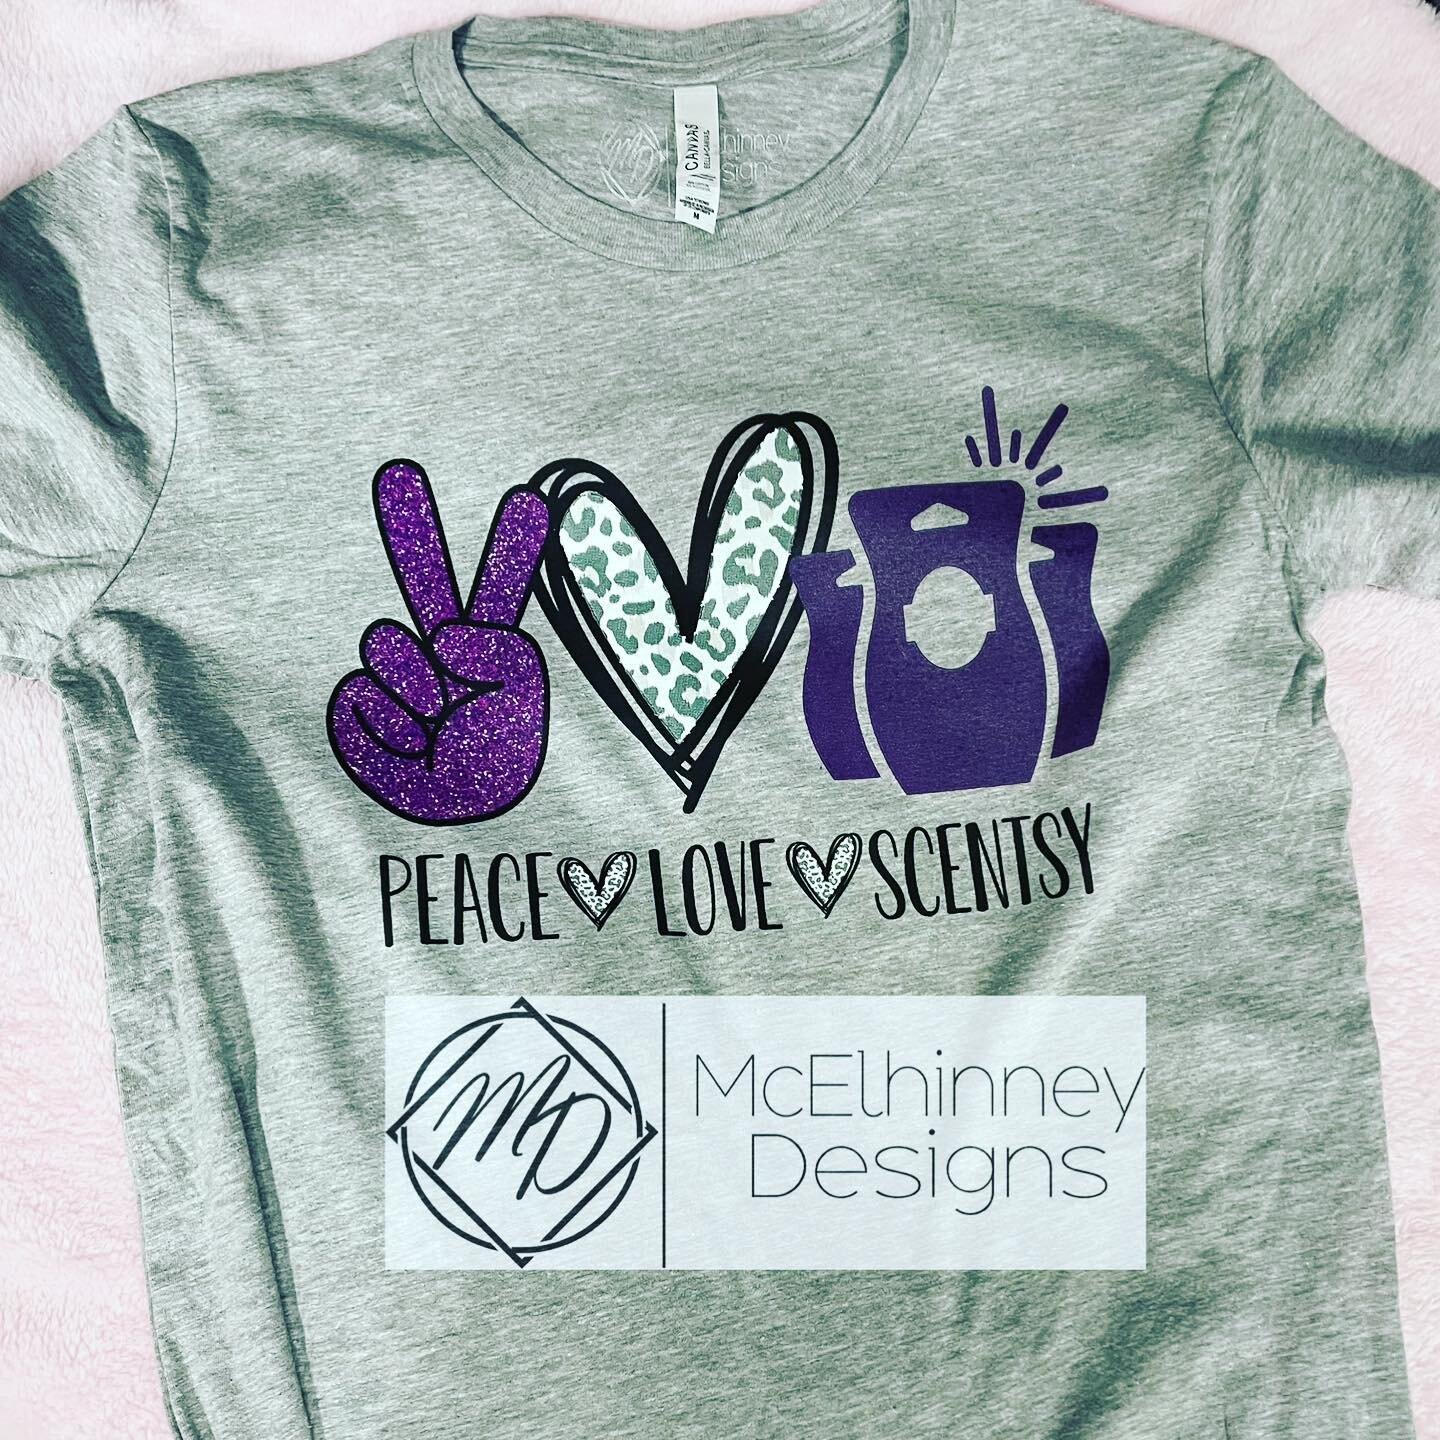 New Peace, Love, Scentsy shirt. 💜⁣
.⁣
.⁣
.⁣
.⁣
.⁣
#scentsywax #disneyscentsy #scentsylove #scentsybars #scentsyproducts #homefragrance #scentsyconsultant #scentsyislife #scentsybar #independentscentsyconsultant #scentsy #homefragrances #scentsyfragr